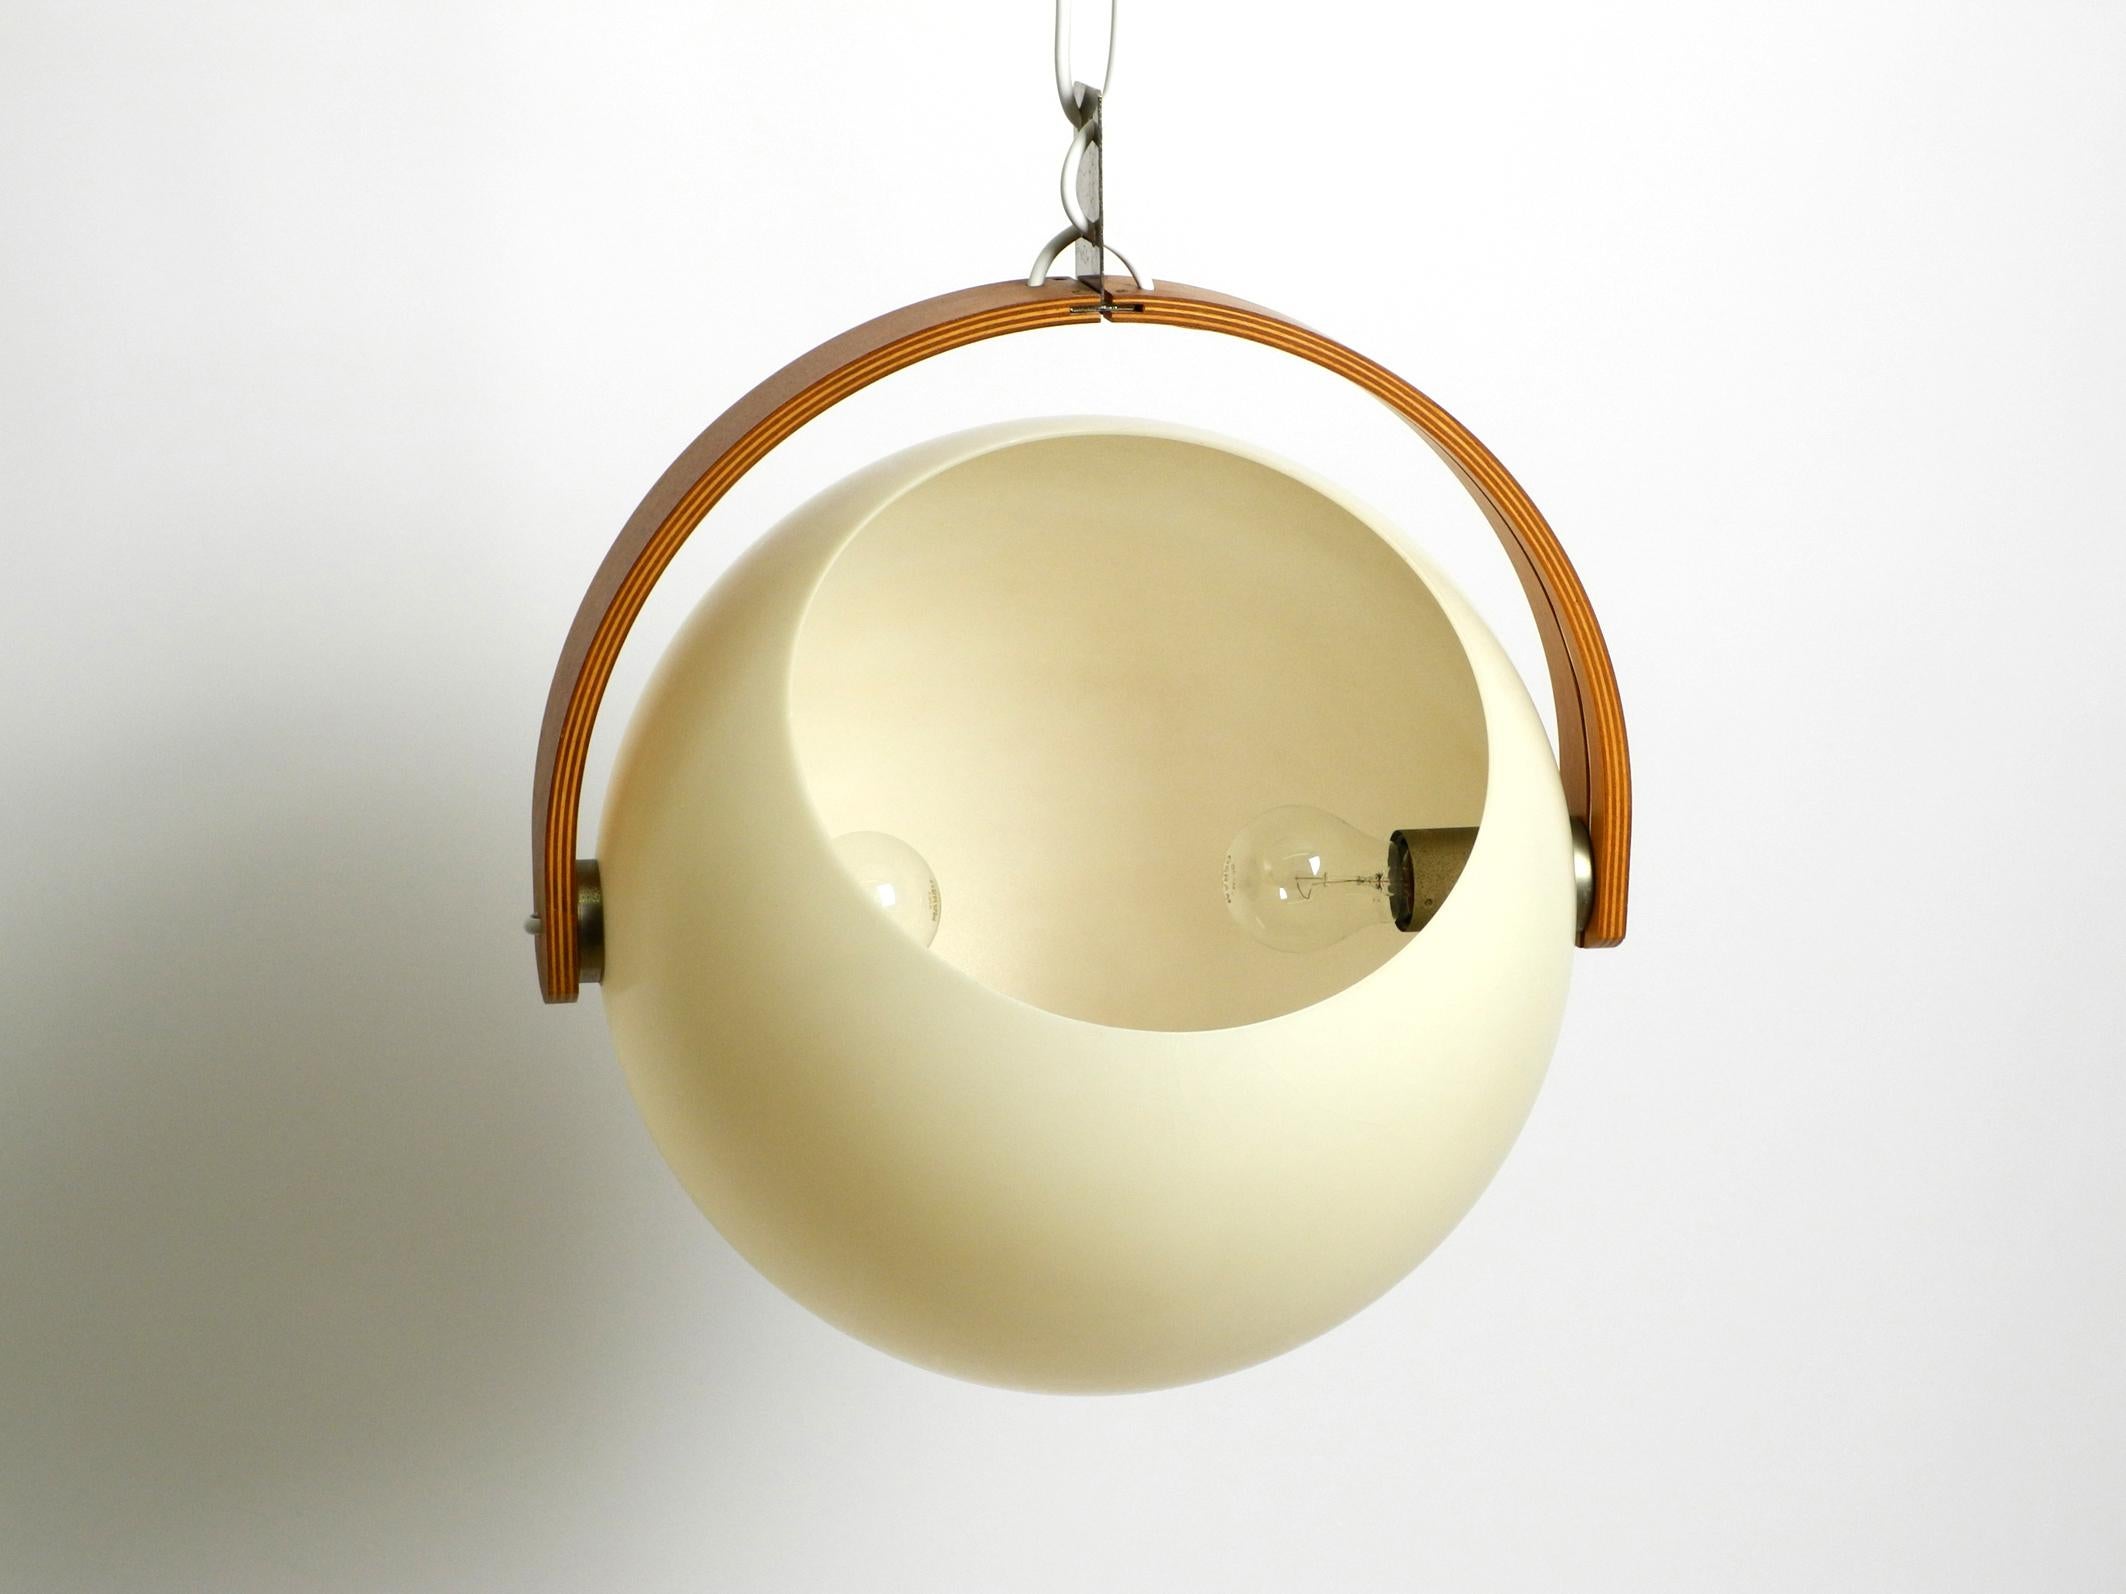 Beautiful and very well preserved vintage ceiling lamp by Temde, an original from the 1960s.
Typical high-quality Space Age design from that time. The lamp consists of a large beige plastic ball with one opening and one teak plywood frame made of a